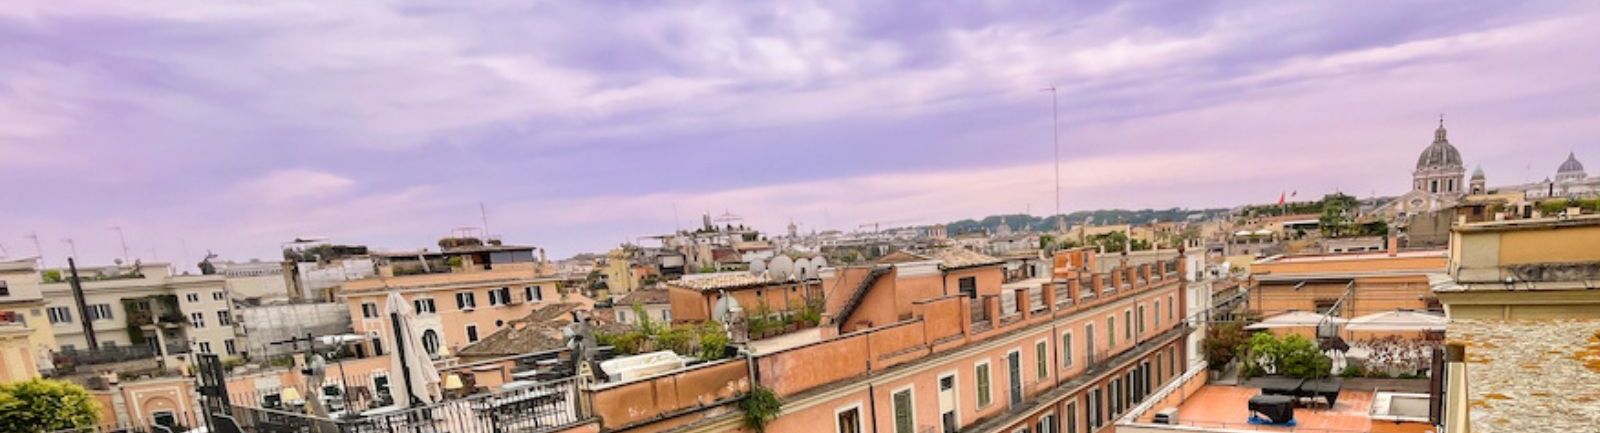 View of Rome from Temple Rome's terrace